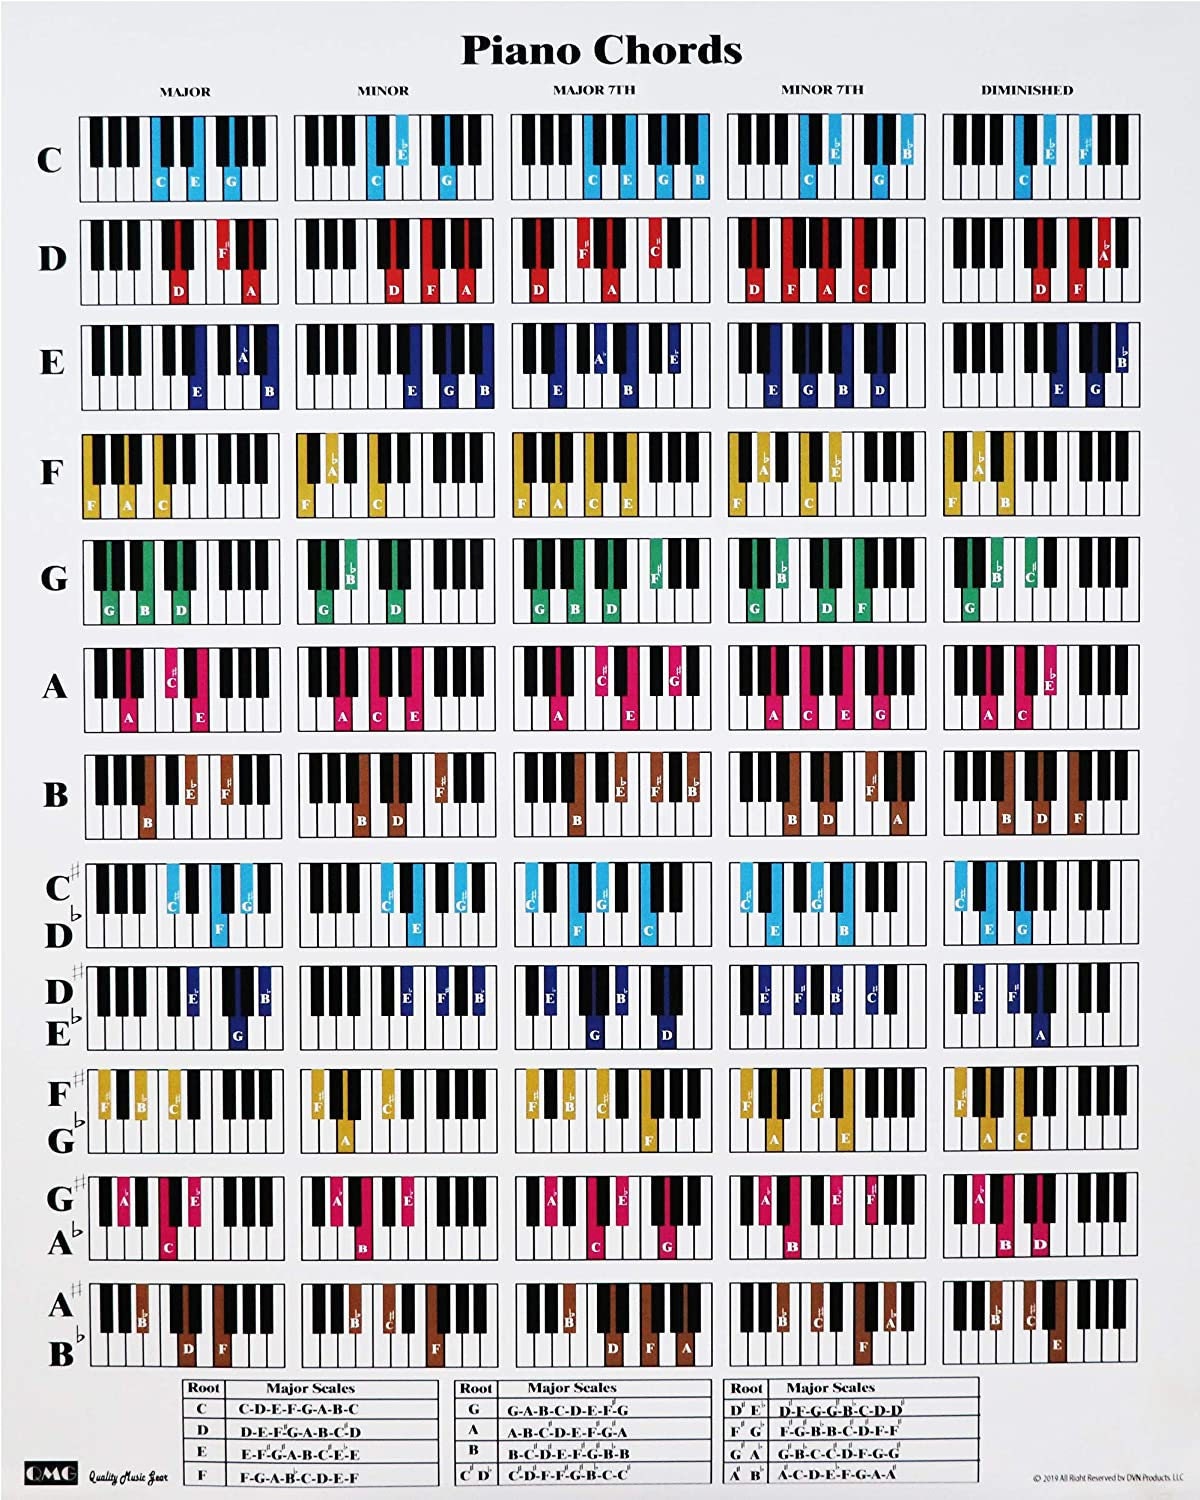 Free You Are In Love-Taylor Swift Piano Sheet Music Preview 1 - Free Piano  Sheet Music & Piano Chords | Better man taylor swift, Taylor swift music,  Taylor swift